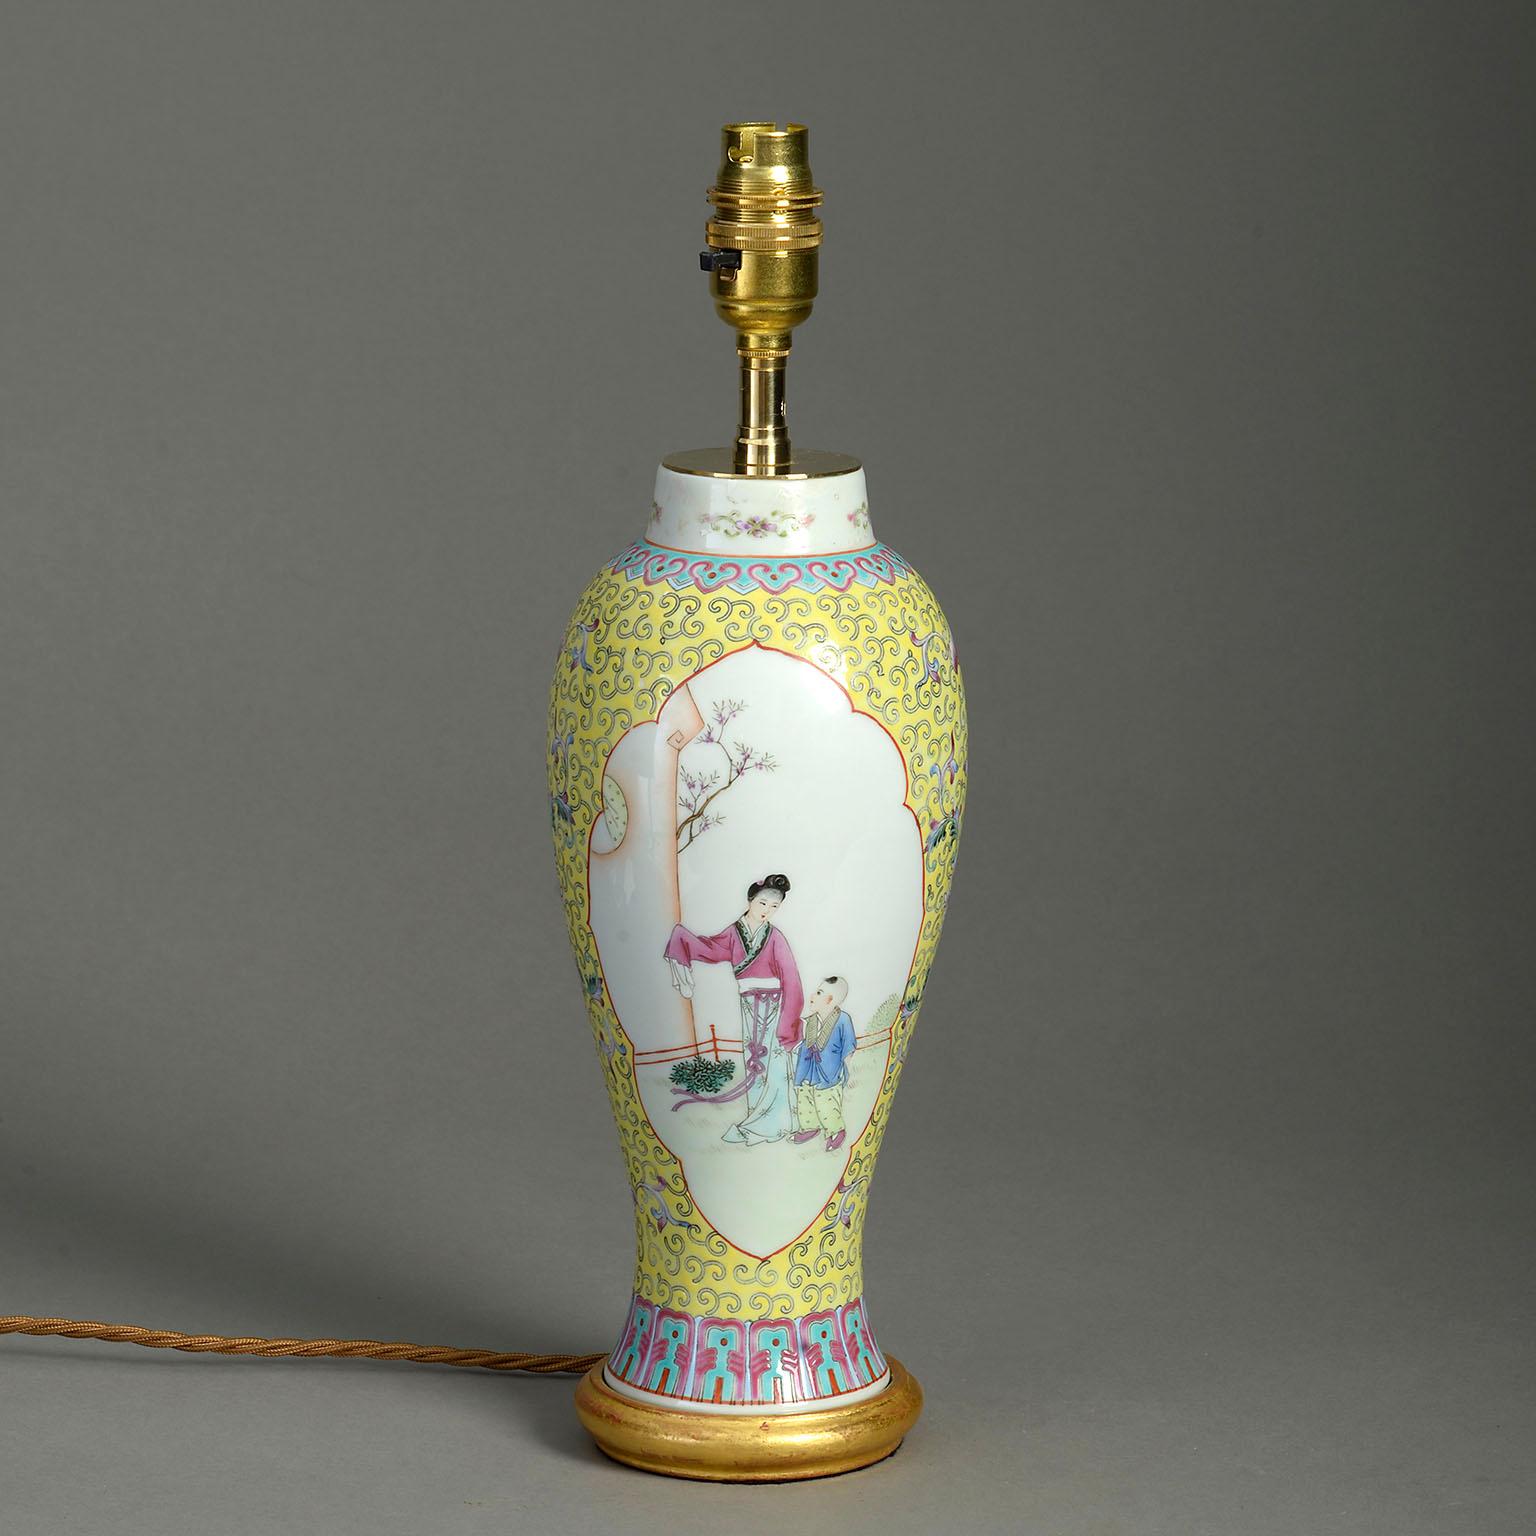 A late 19th century famille rose porcelain baluster vase, with figurative cartouches upon a yellow ground. Now mounted as a table lamp upon a hand-turned giltwood base.

Dimensions refer to vase and gilded base only.

Shade for display purposes